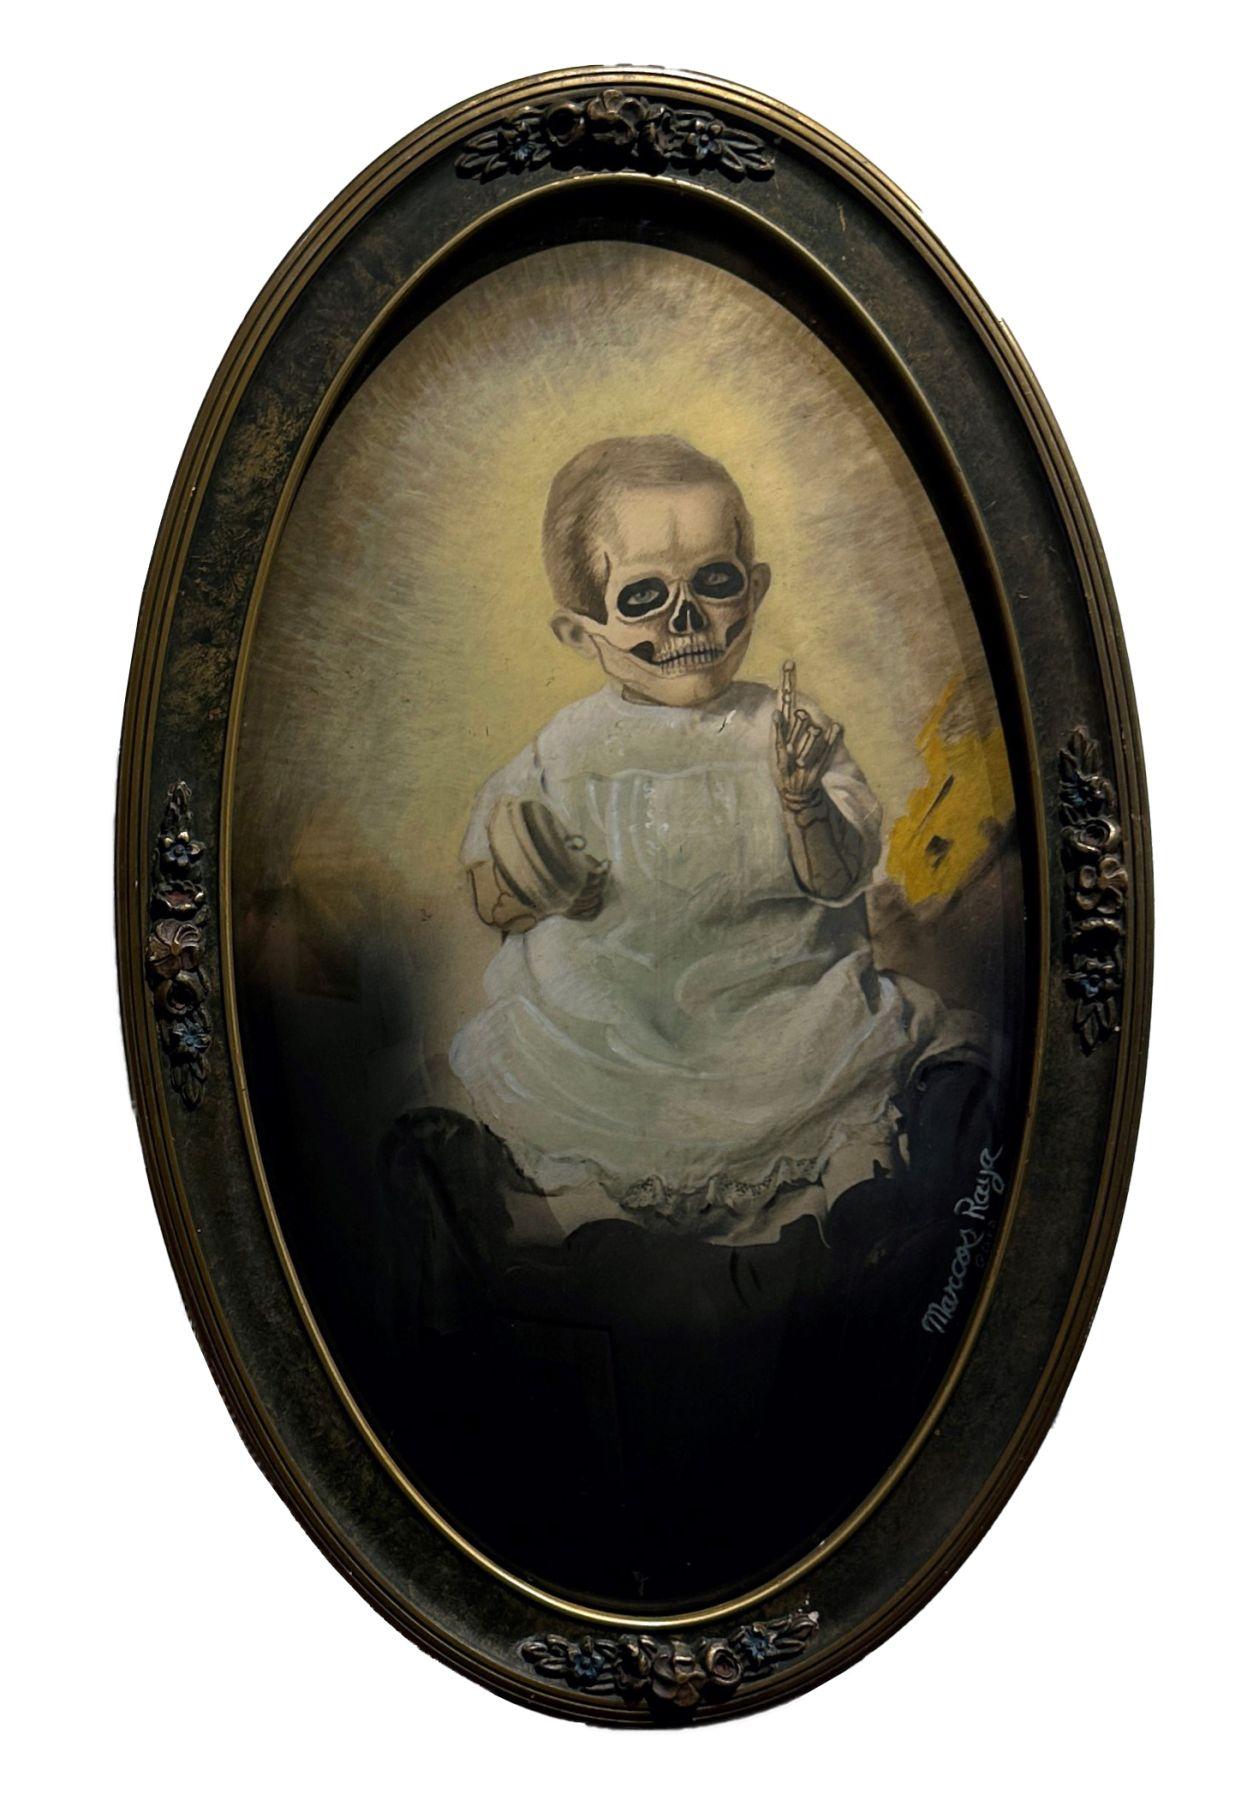 Marcos Raya Figurative Photograph - Baby Lou - Antique Painted and Appropriated Photograph, Original Frame